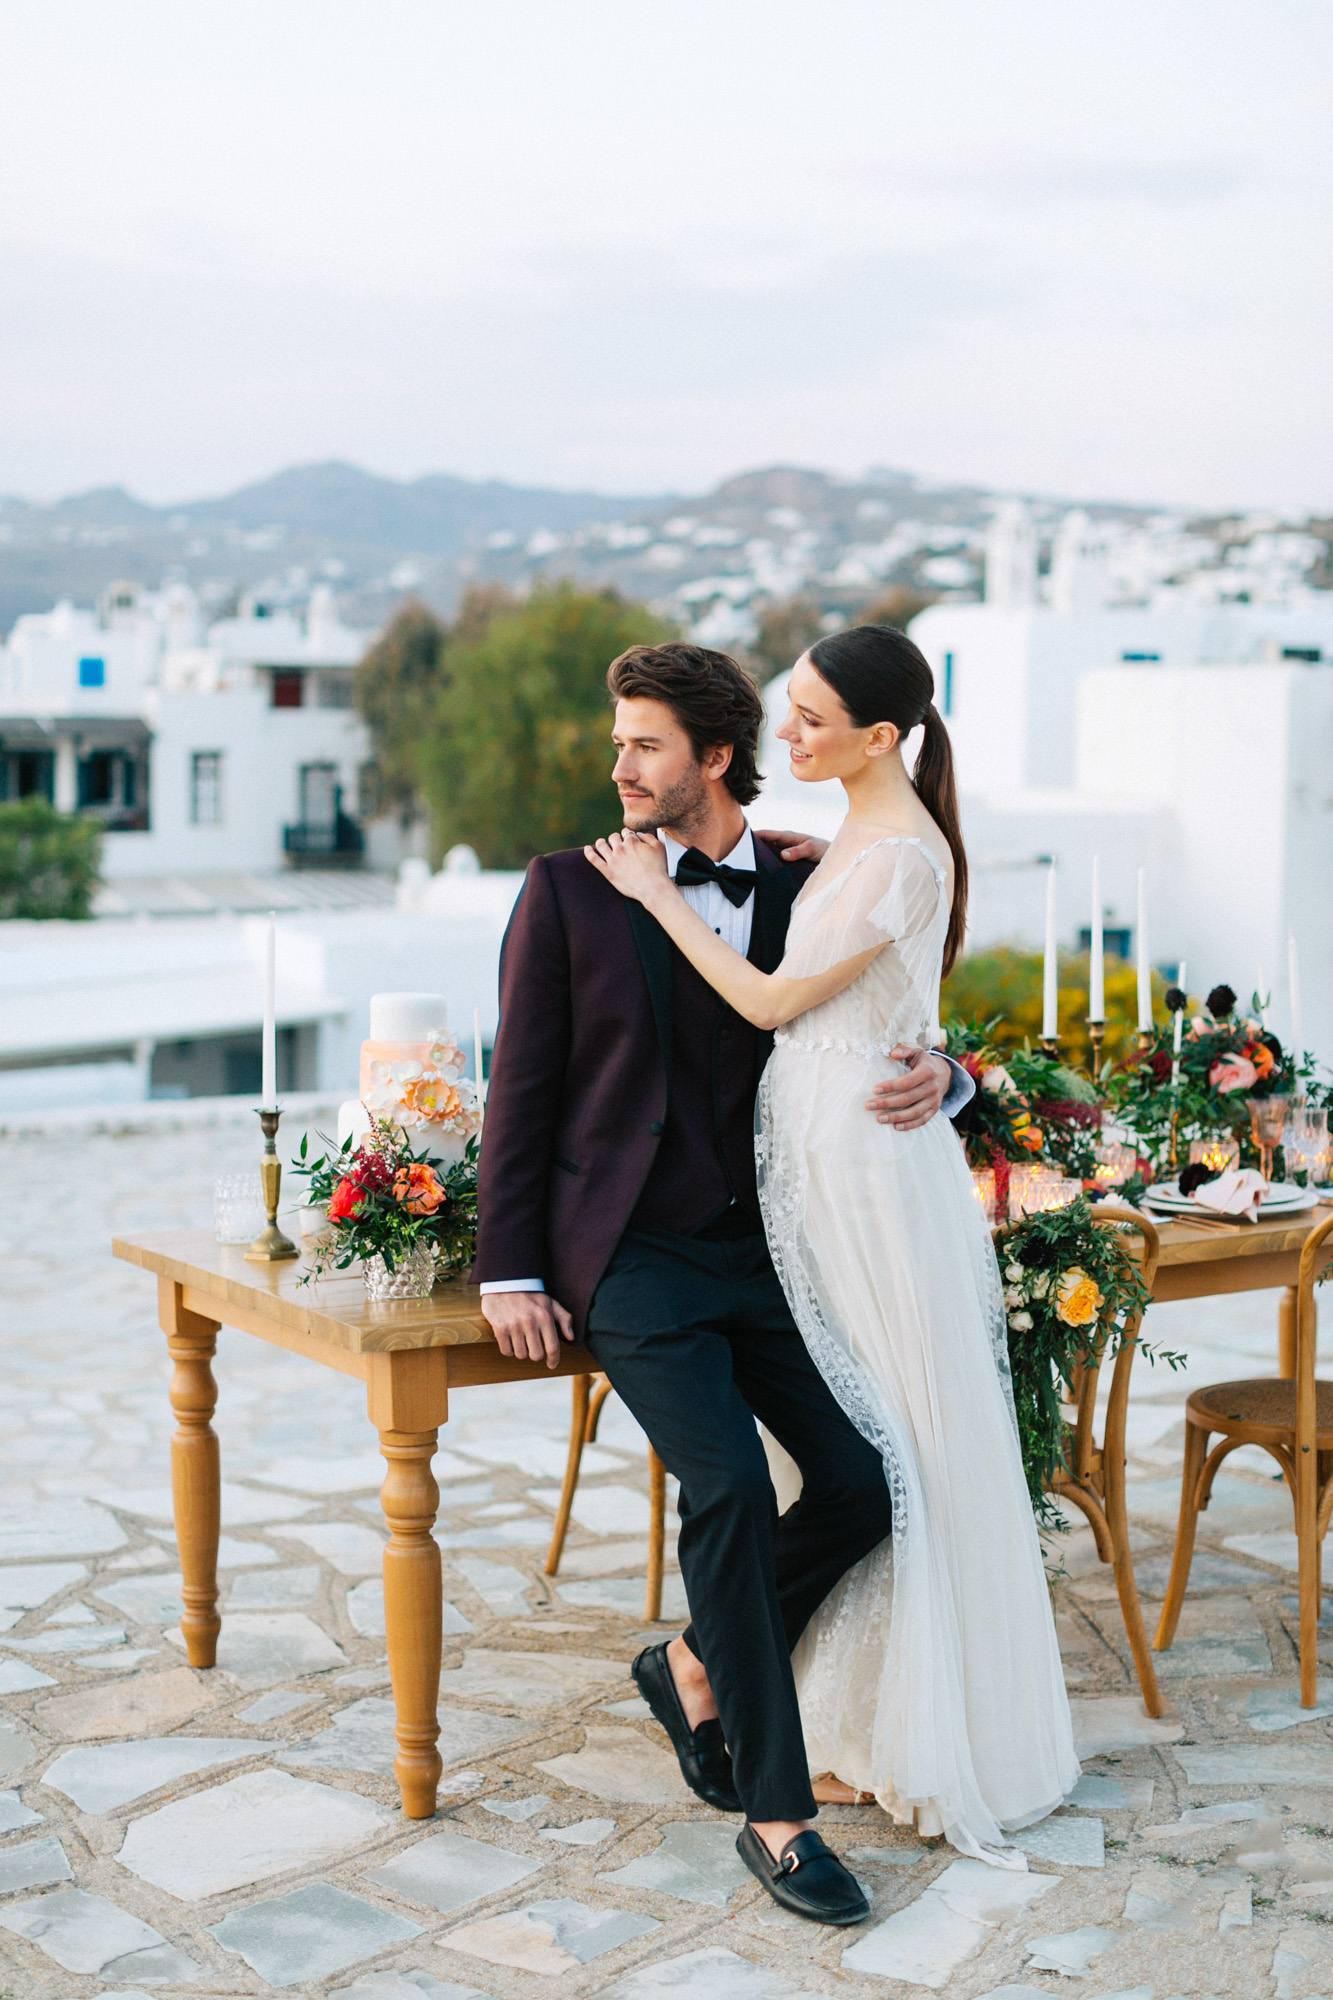 Bride and groom posing for a wedding photographer in Mykonos.